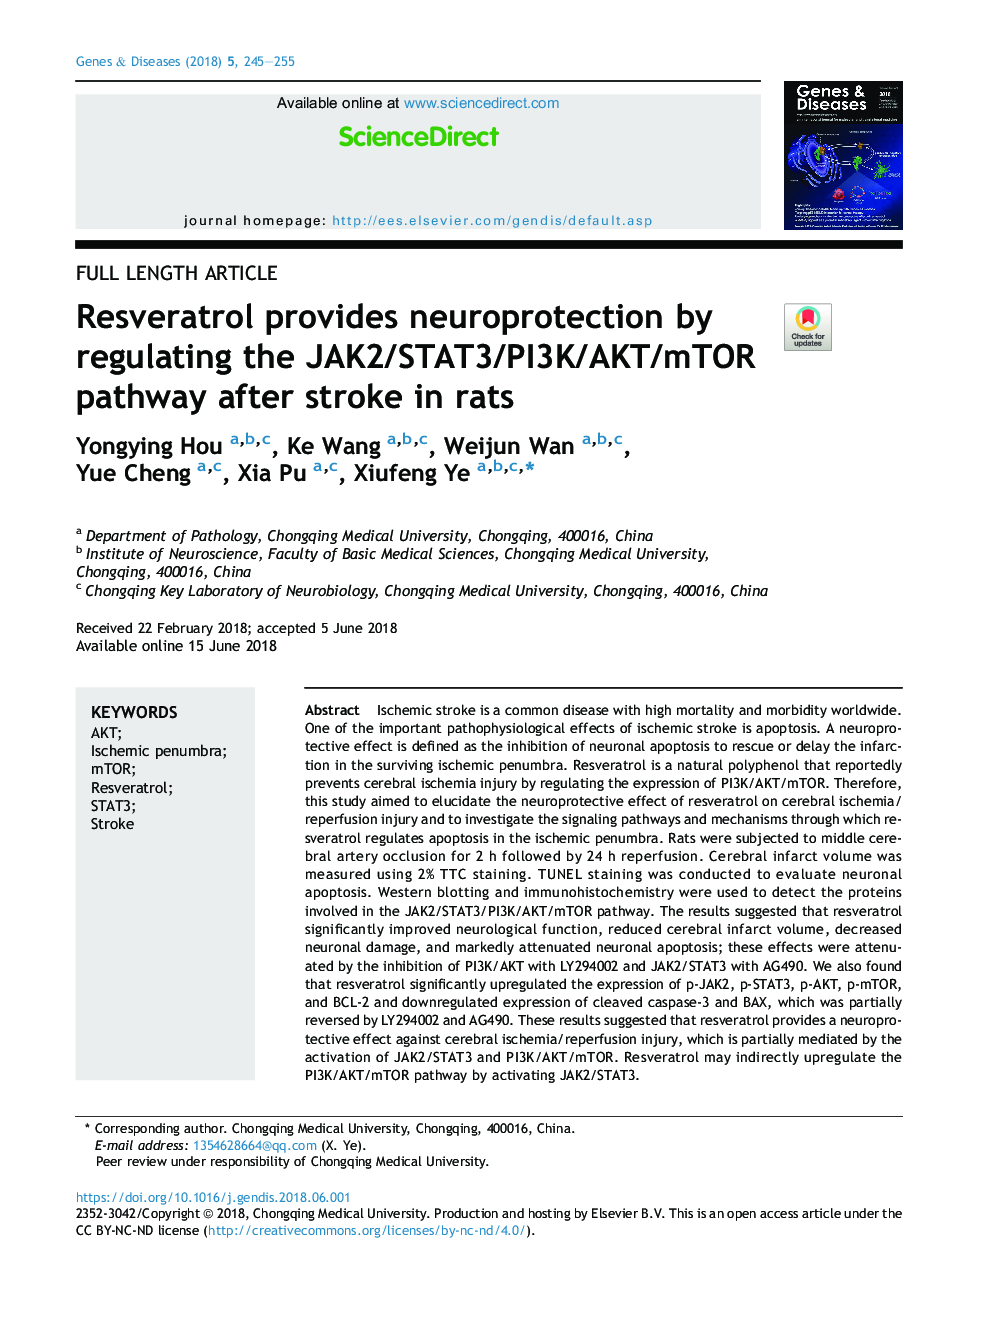 Resveratrol provides neuroprotection by regulating the JAK2/STAT3/PI3K/AKT/mTOR pathway after stroke in rats